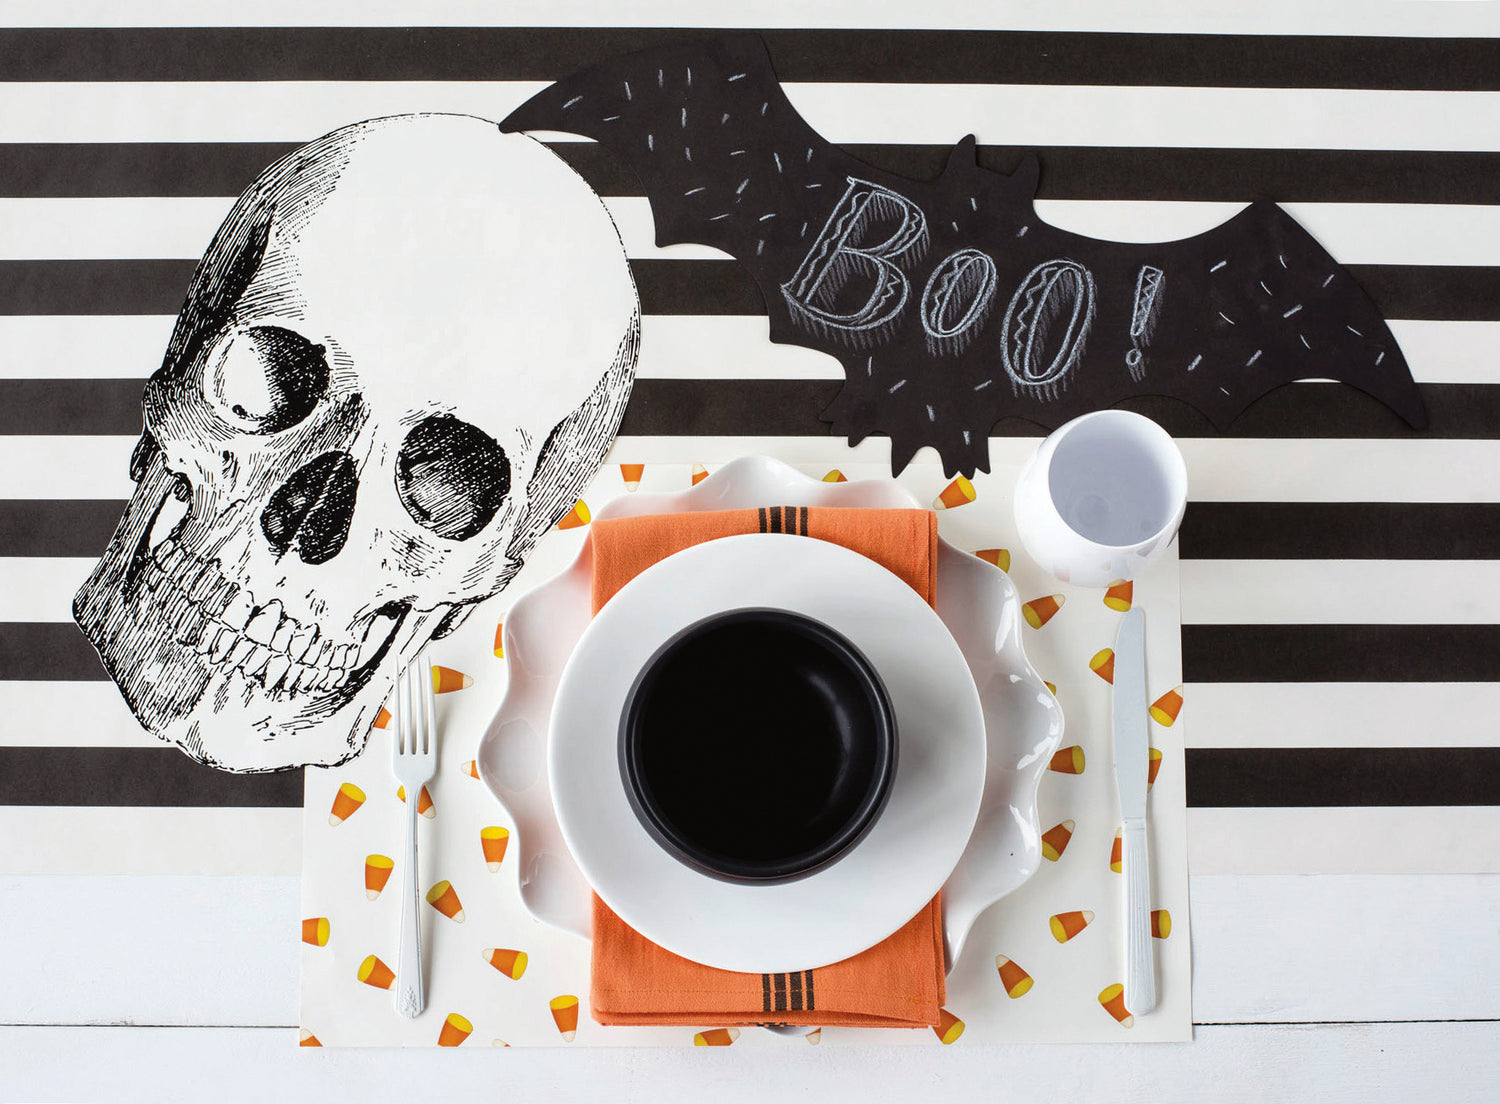 The Black Classic Stripe Runner under a spooky Halloween-themed place setting, from above.